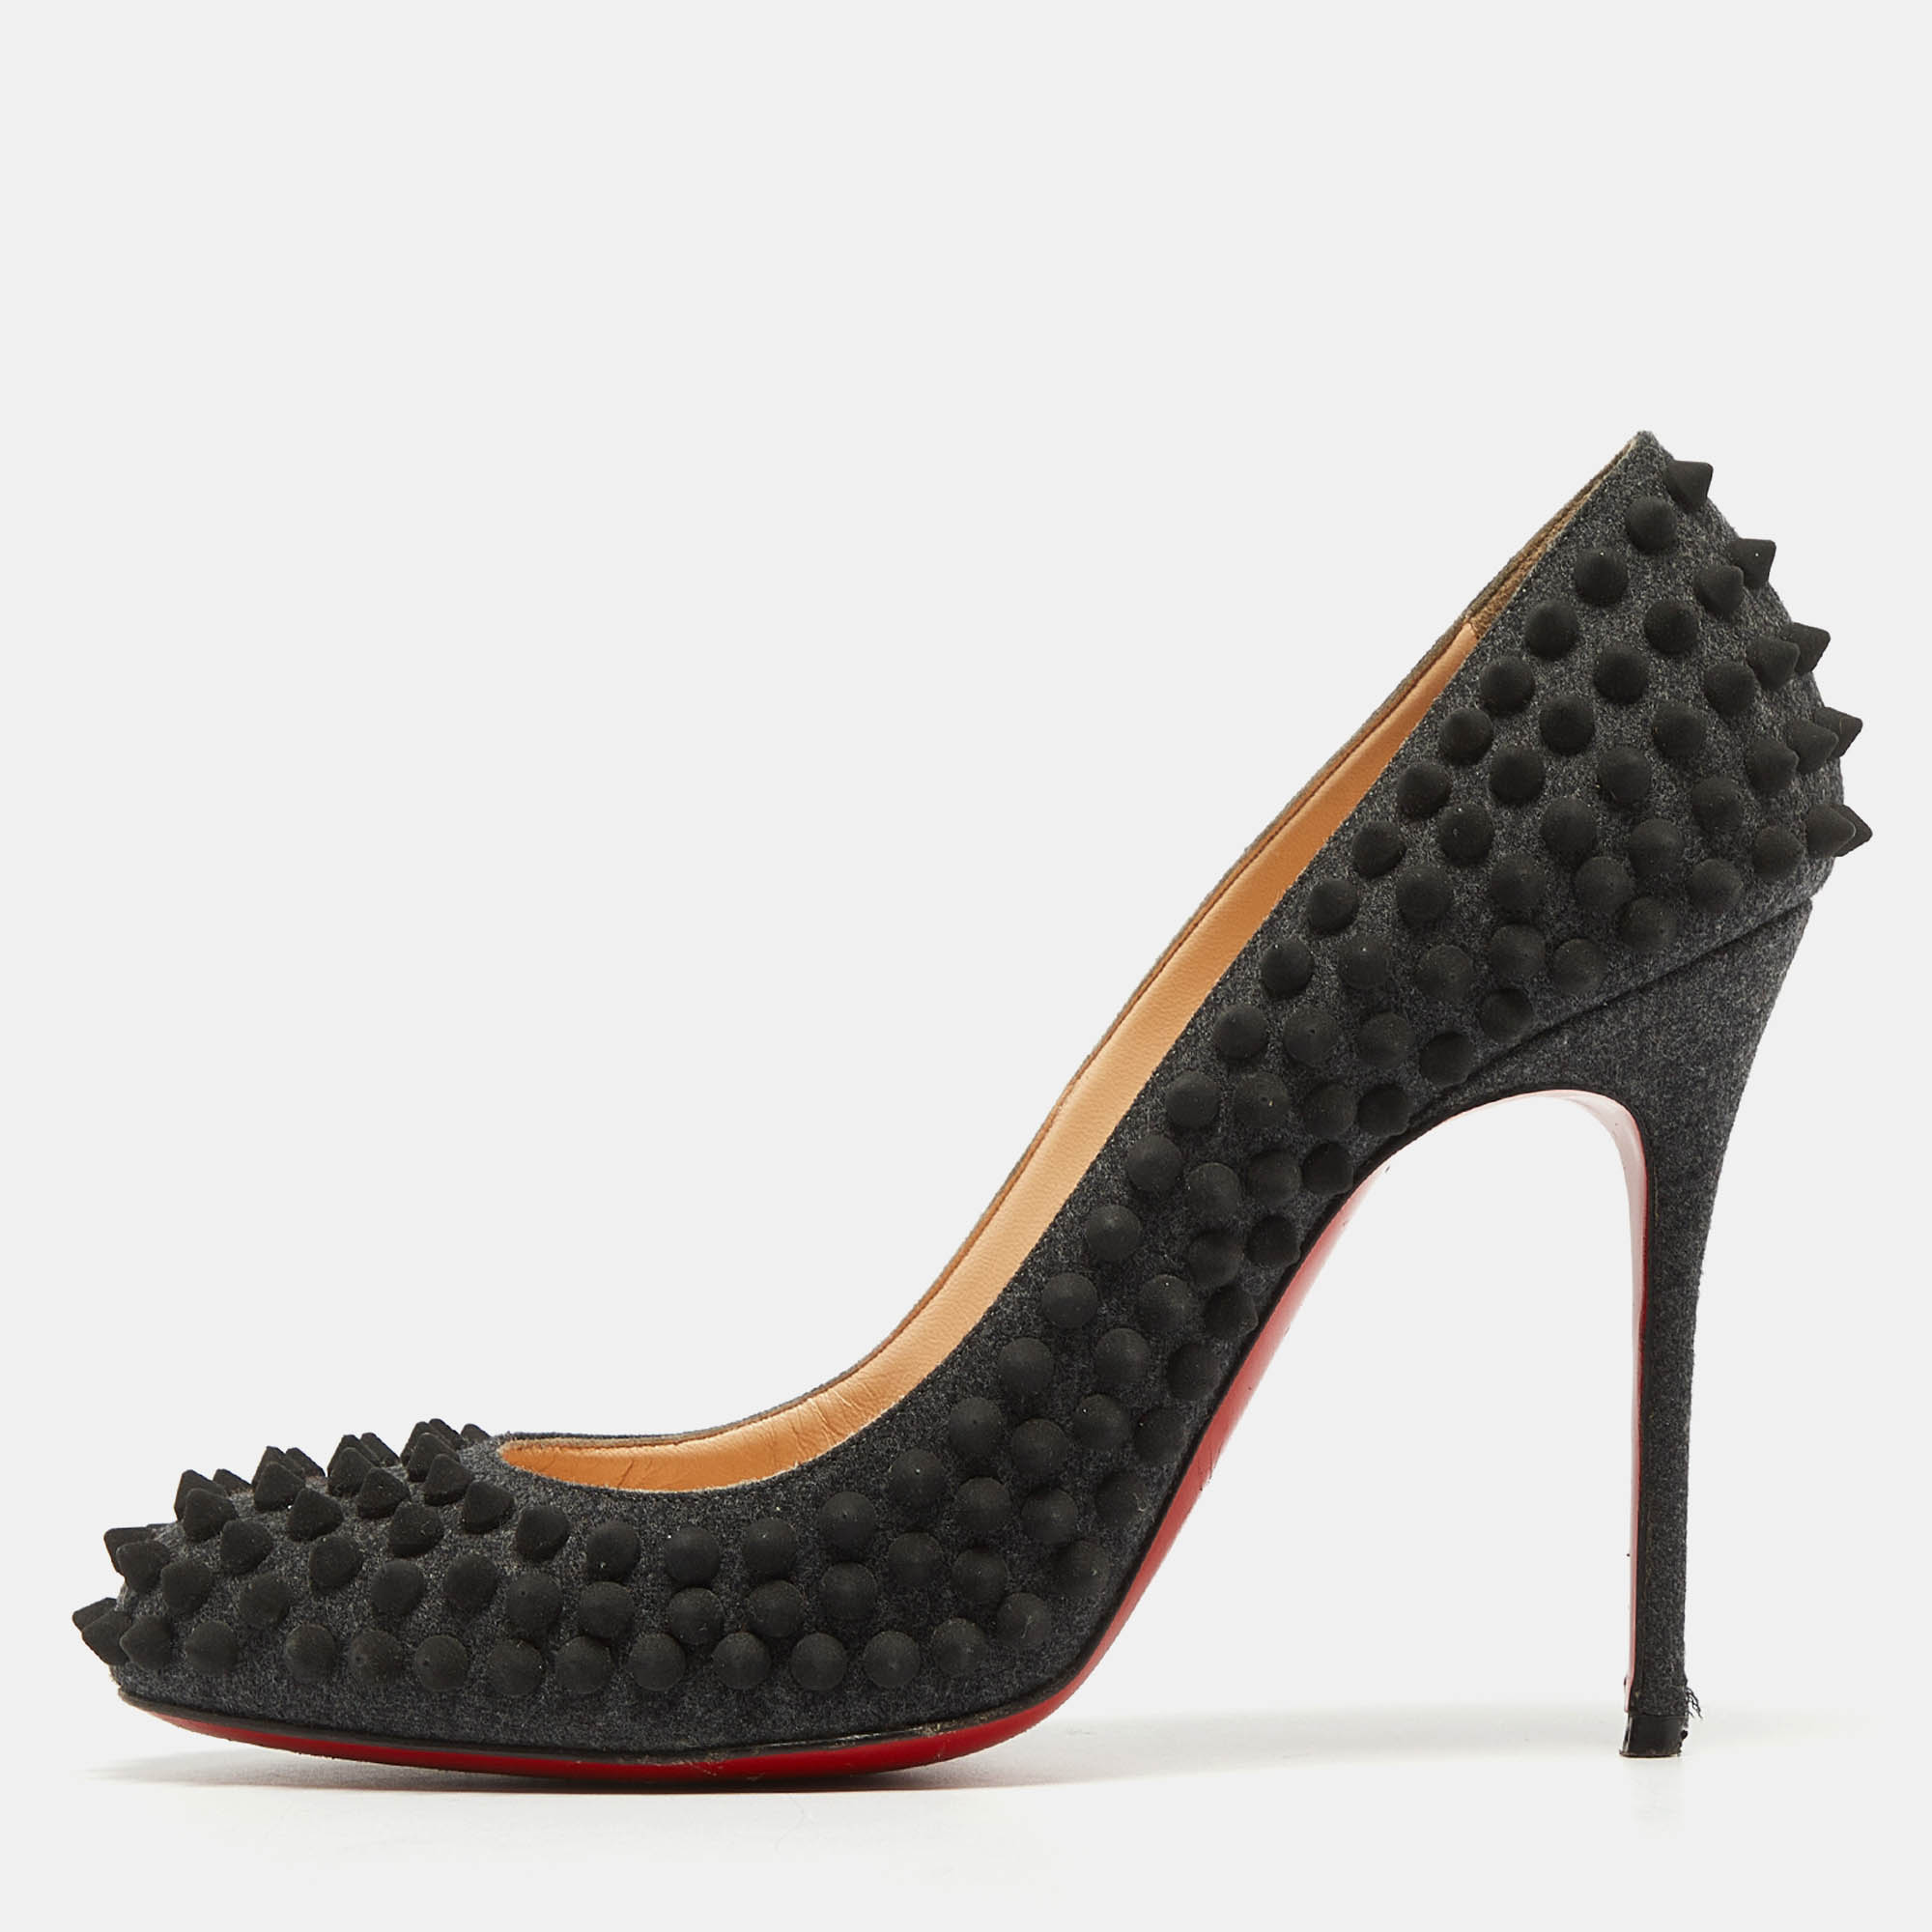 Christian louboutin black shearling fur spike accents pumps size 38